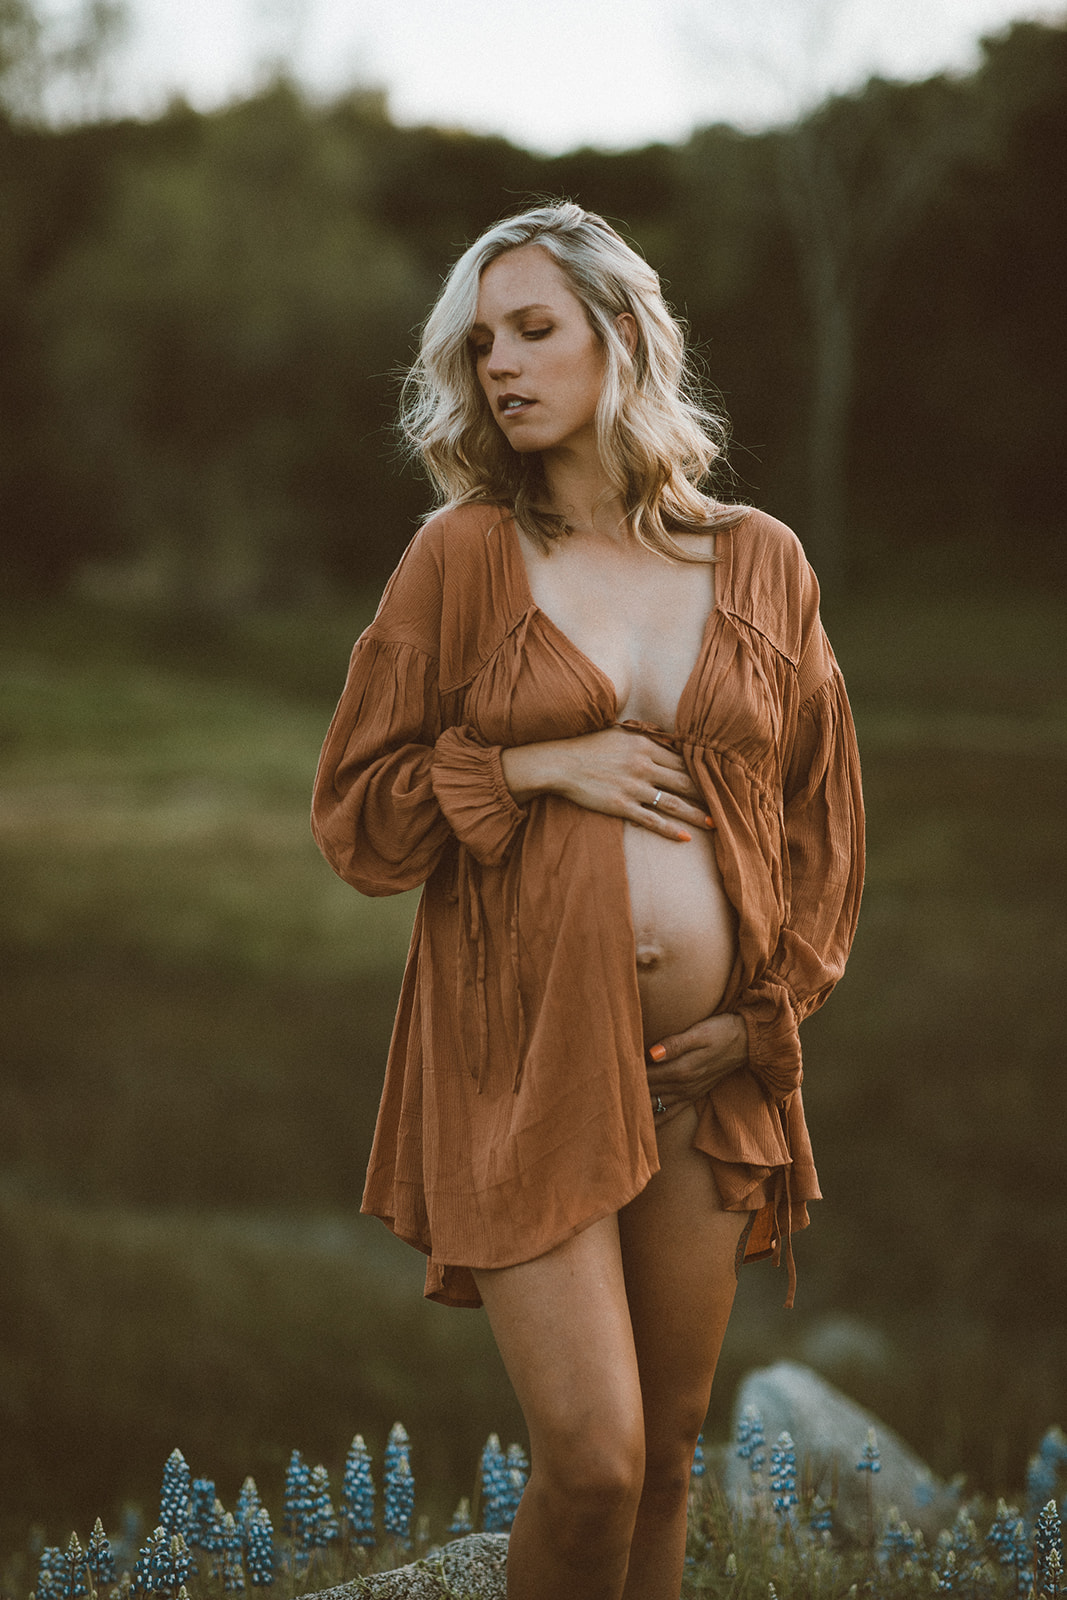 Maternity session in nature shot  by Aspen Photographer Joy Maura